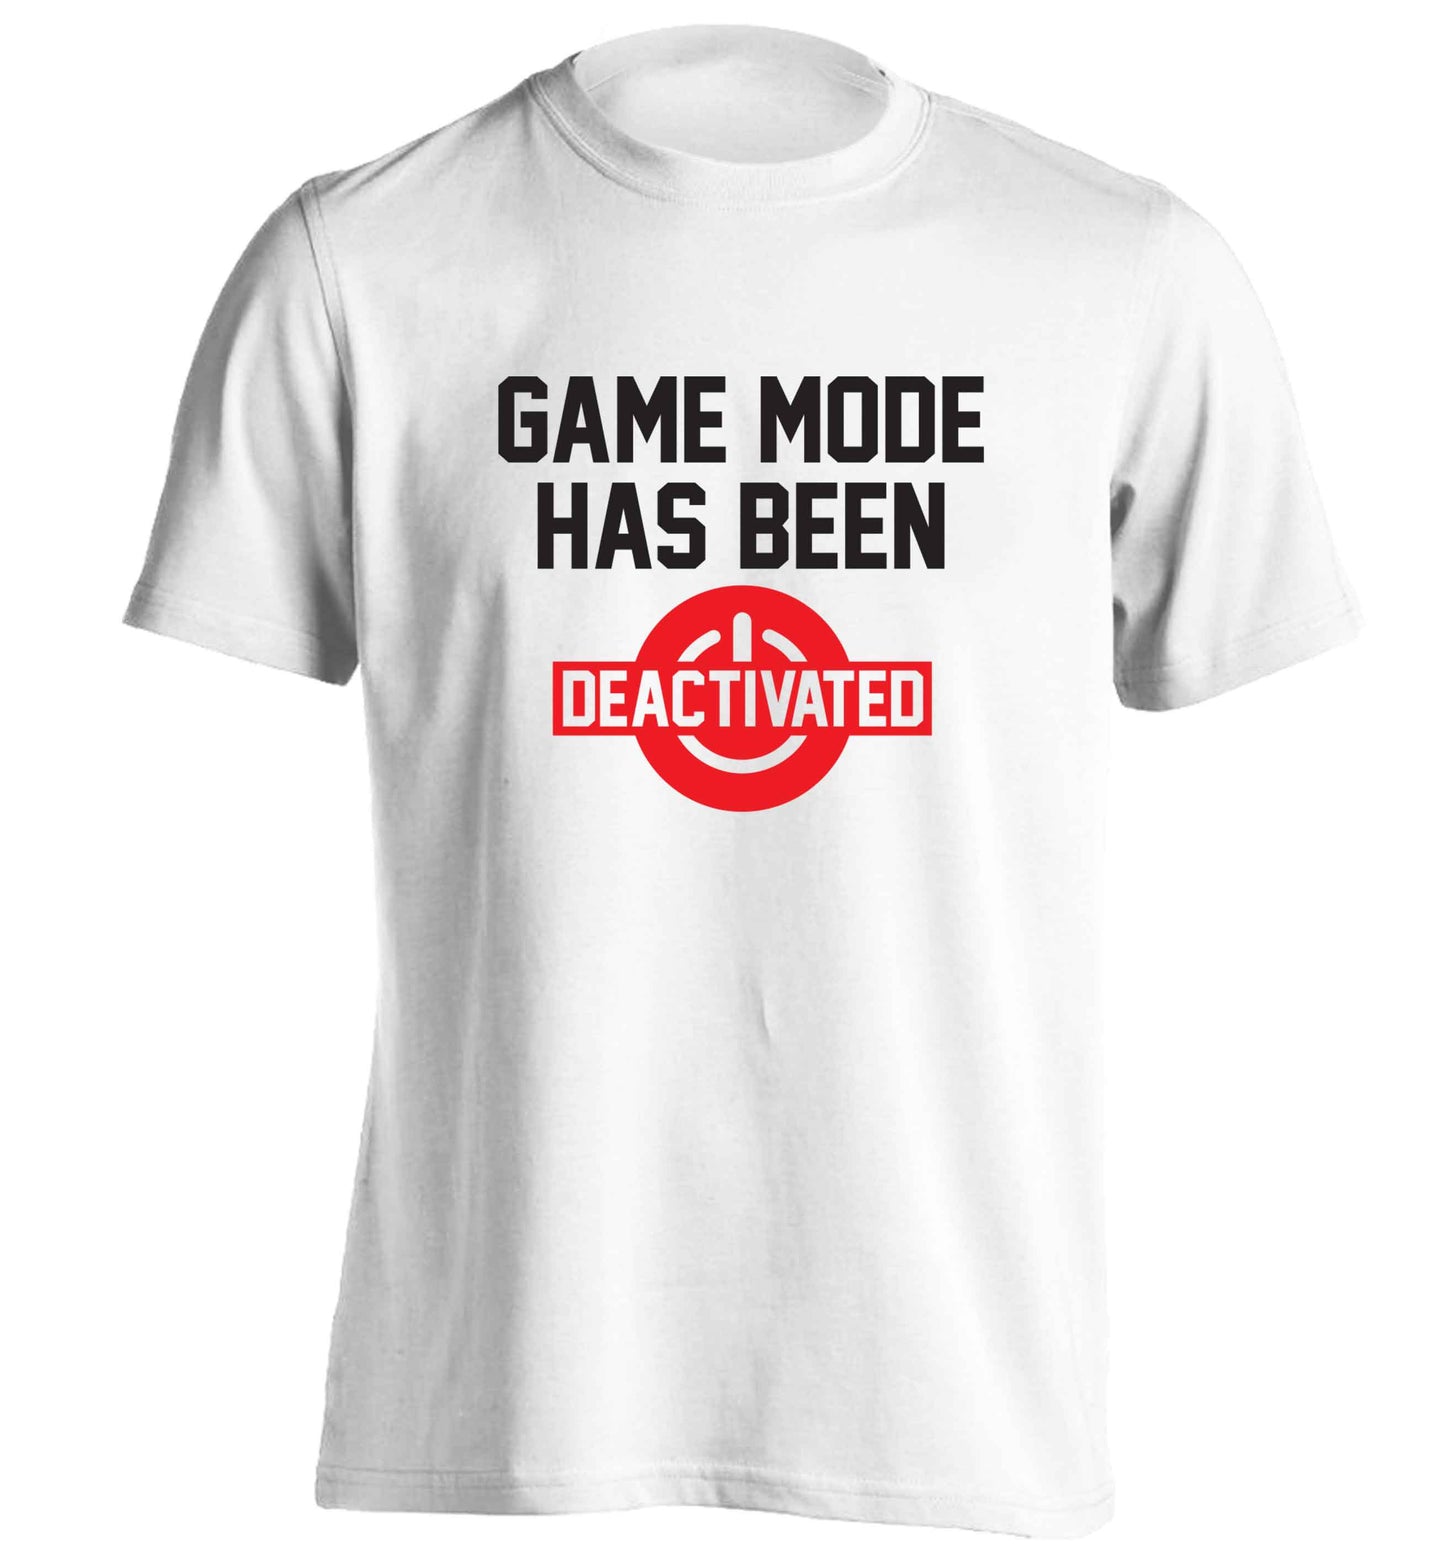 Game Mode Has Been Deactivated adults unisex white Tshirt 2XL